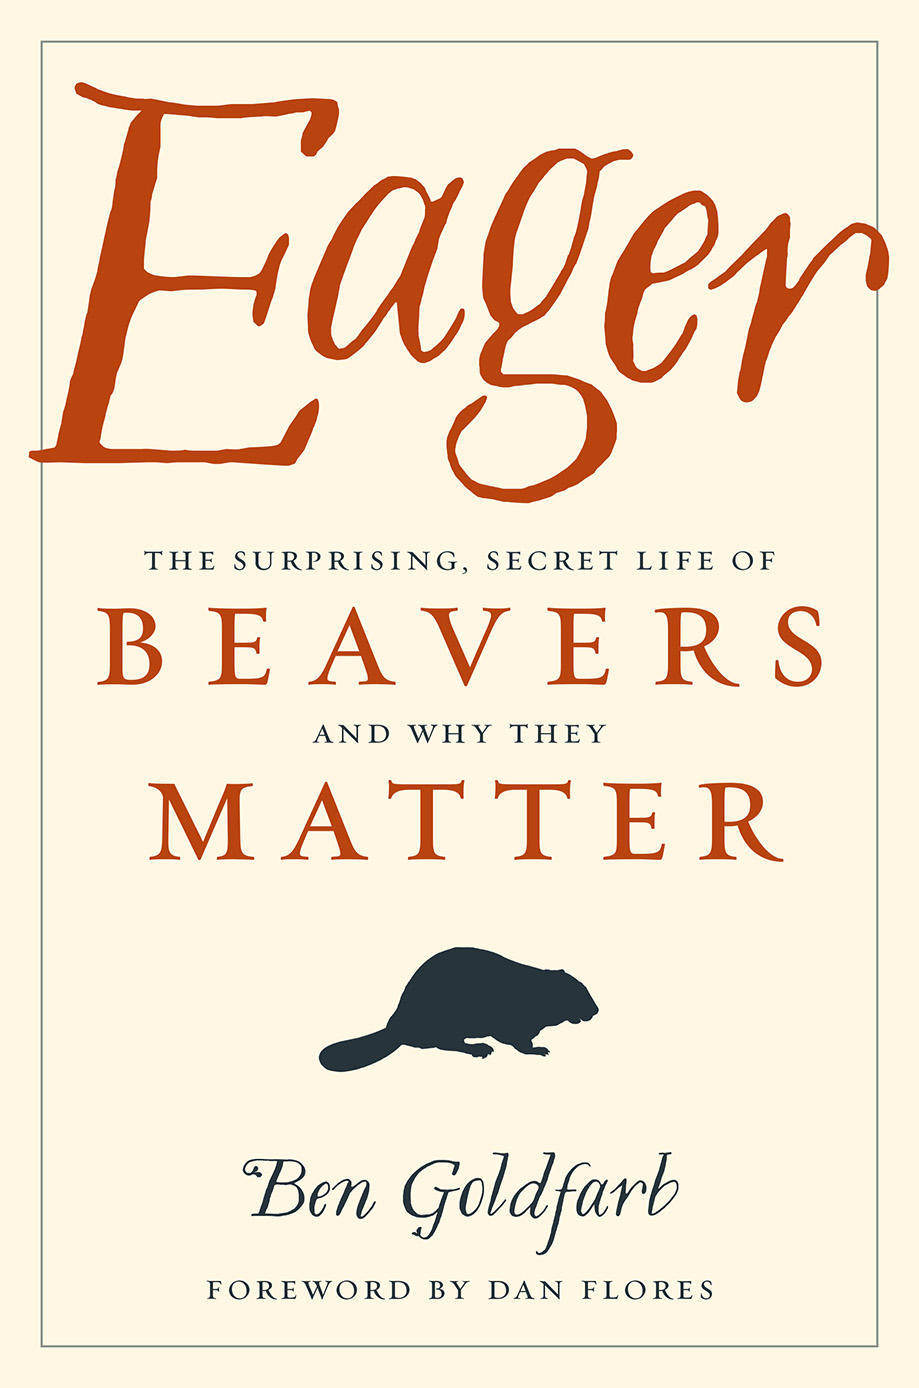 Eager, book by Ben Goldfarb